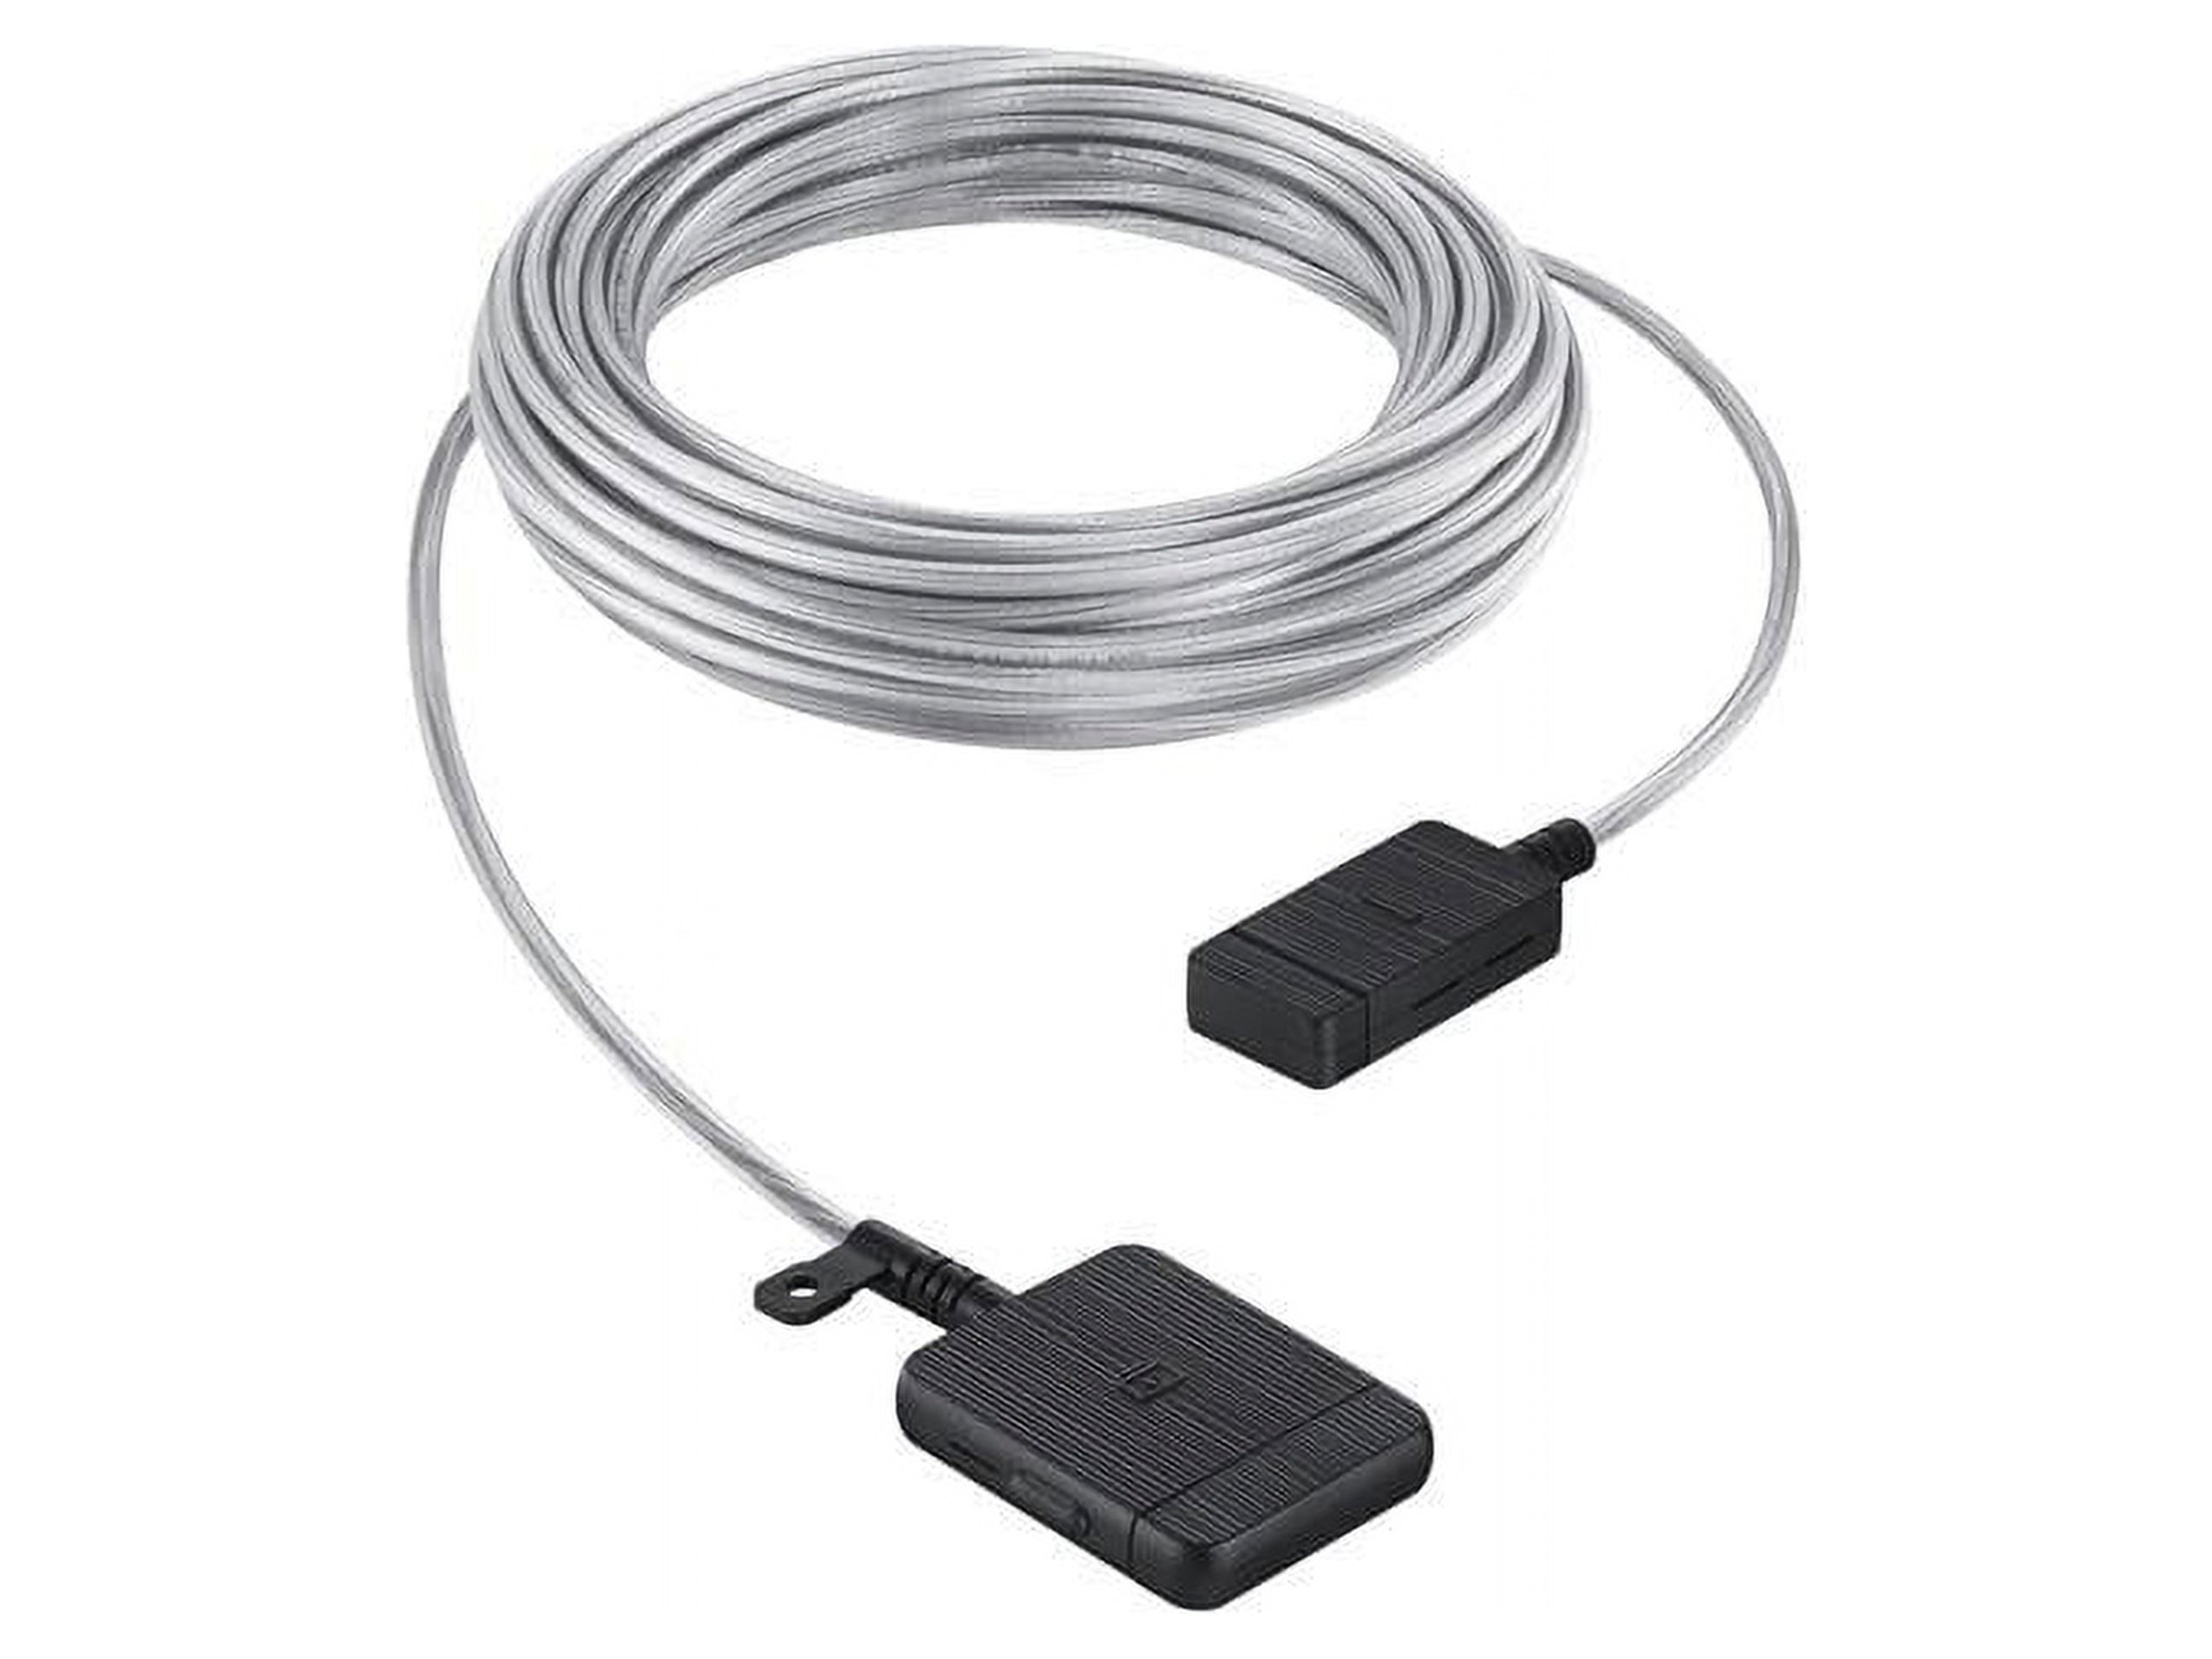 Samsung VG-SOCR15/ZA 15m One Invisible Connection Cable - image 1 of 4